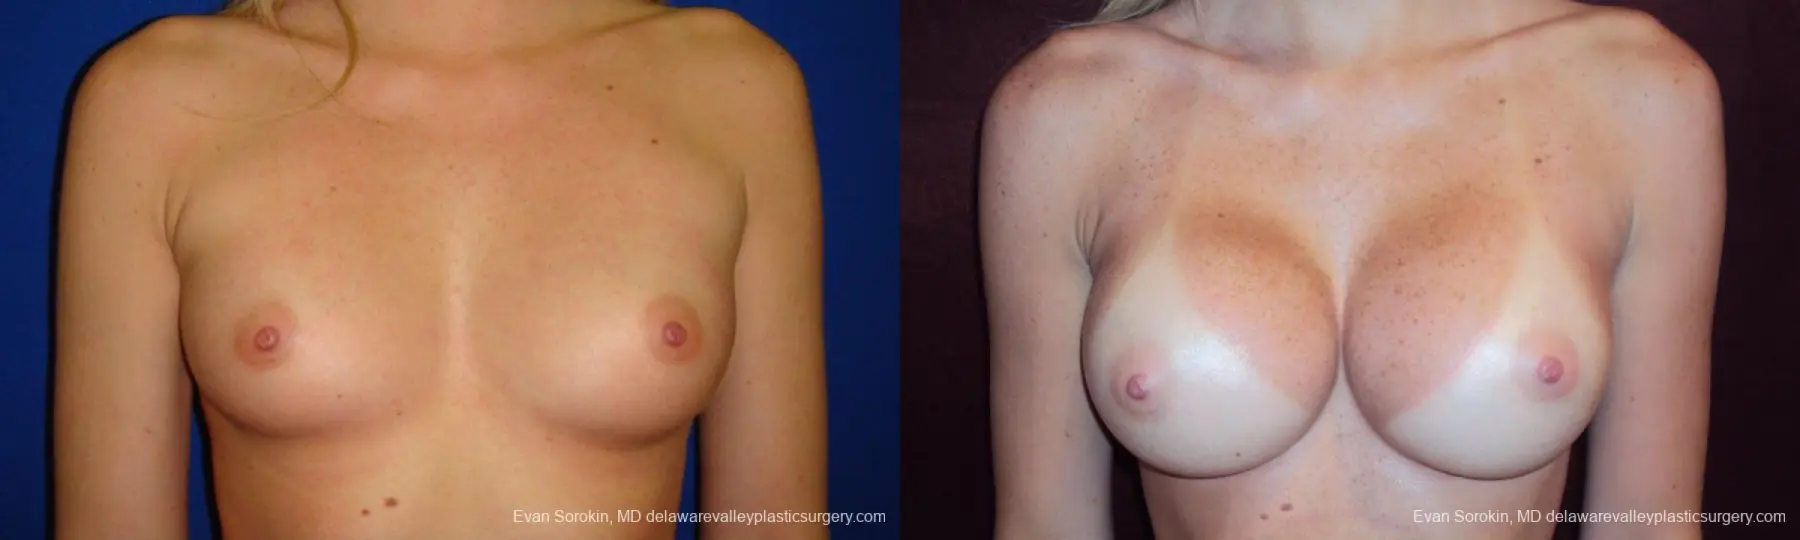 Philadelphia Breast Augmentation 9293 - Before and After 1